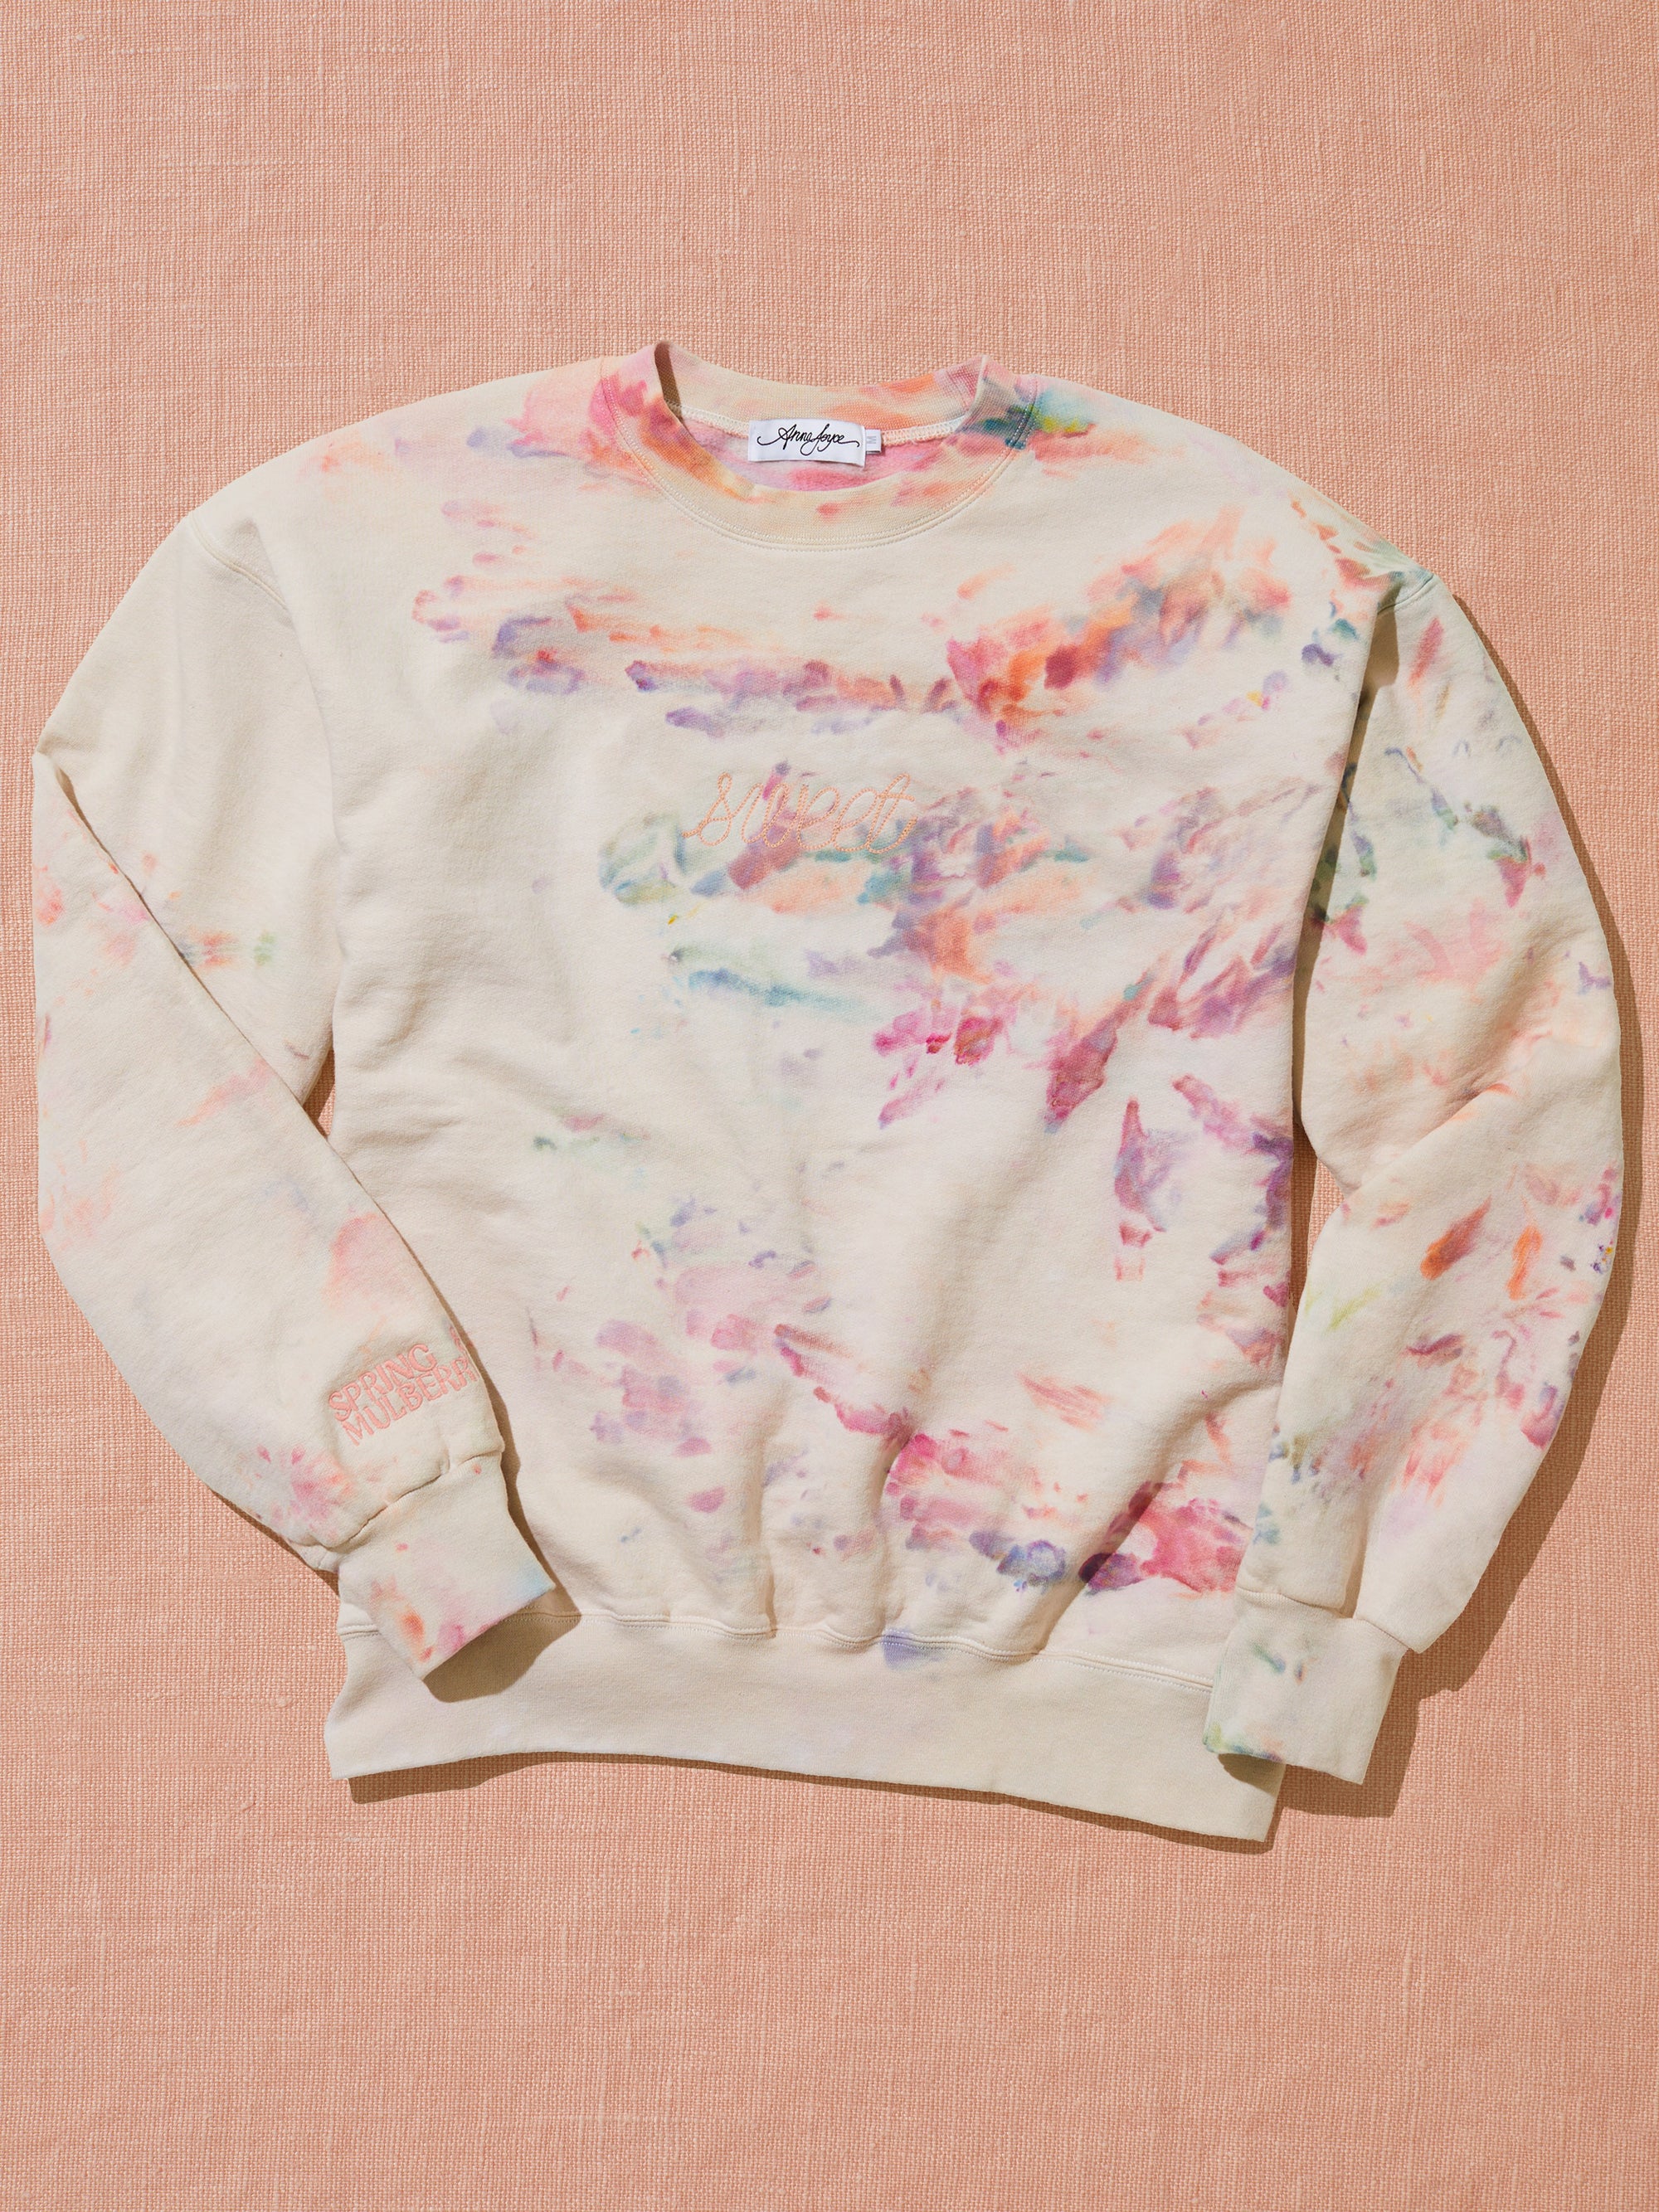 An ice-dyed sweatshirt chainstitched with the word "sweet" sits on a peach fabric backdrop.